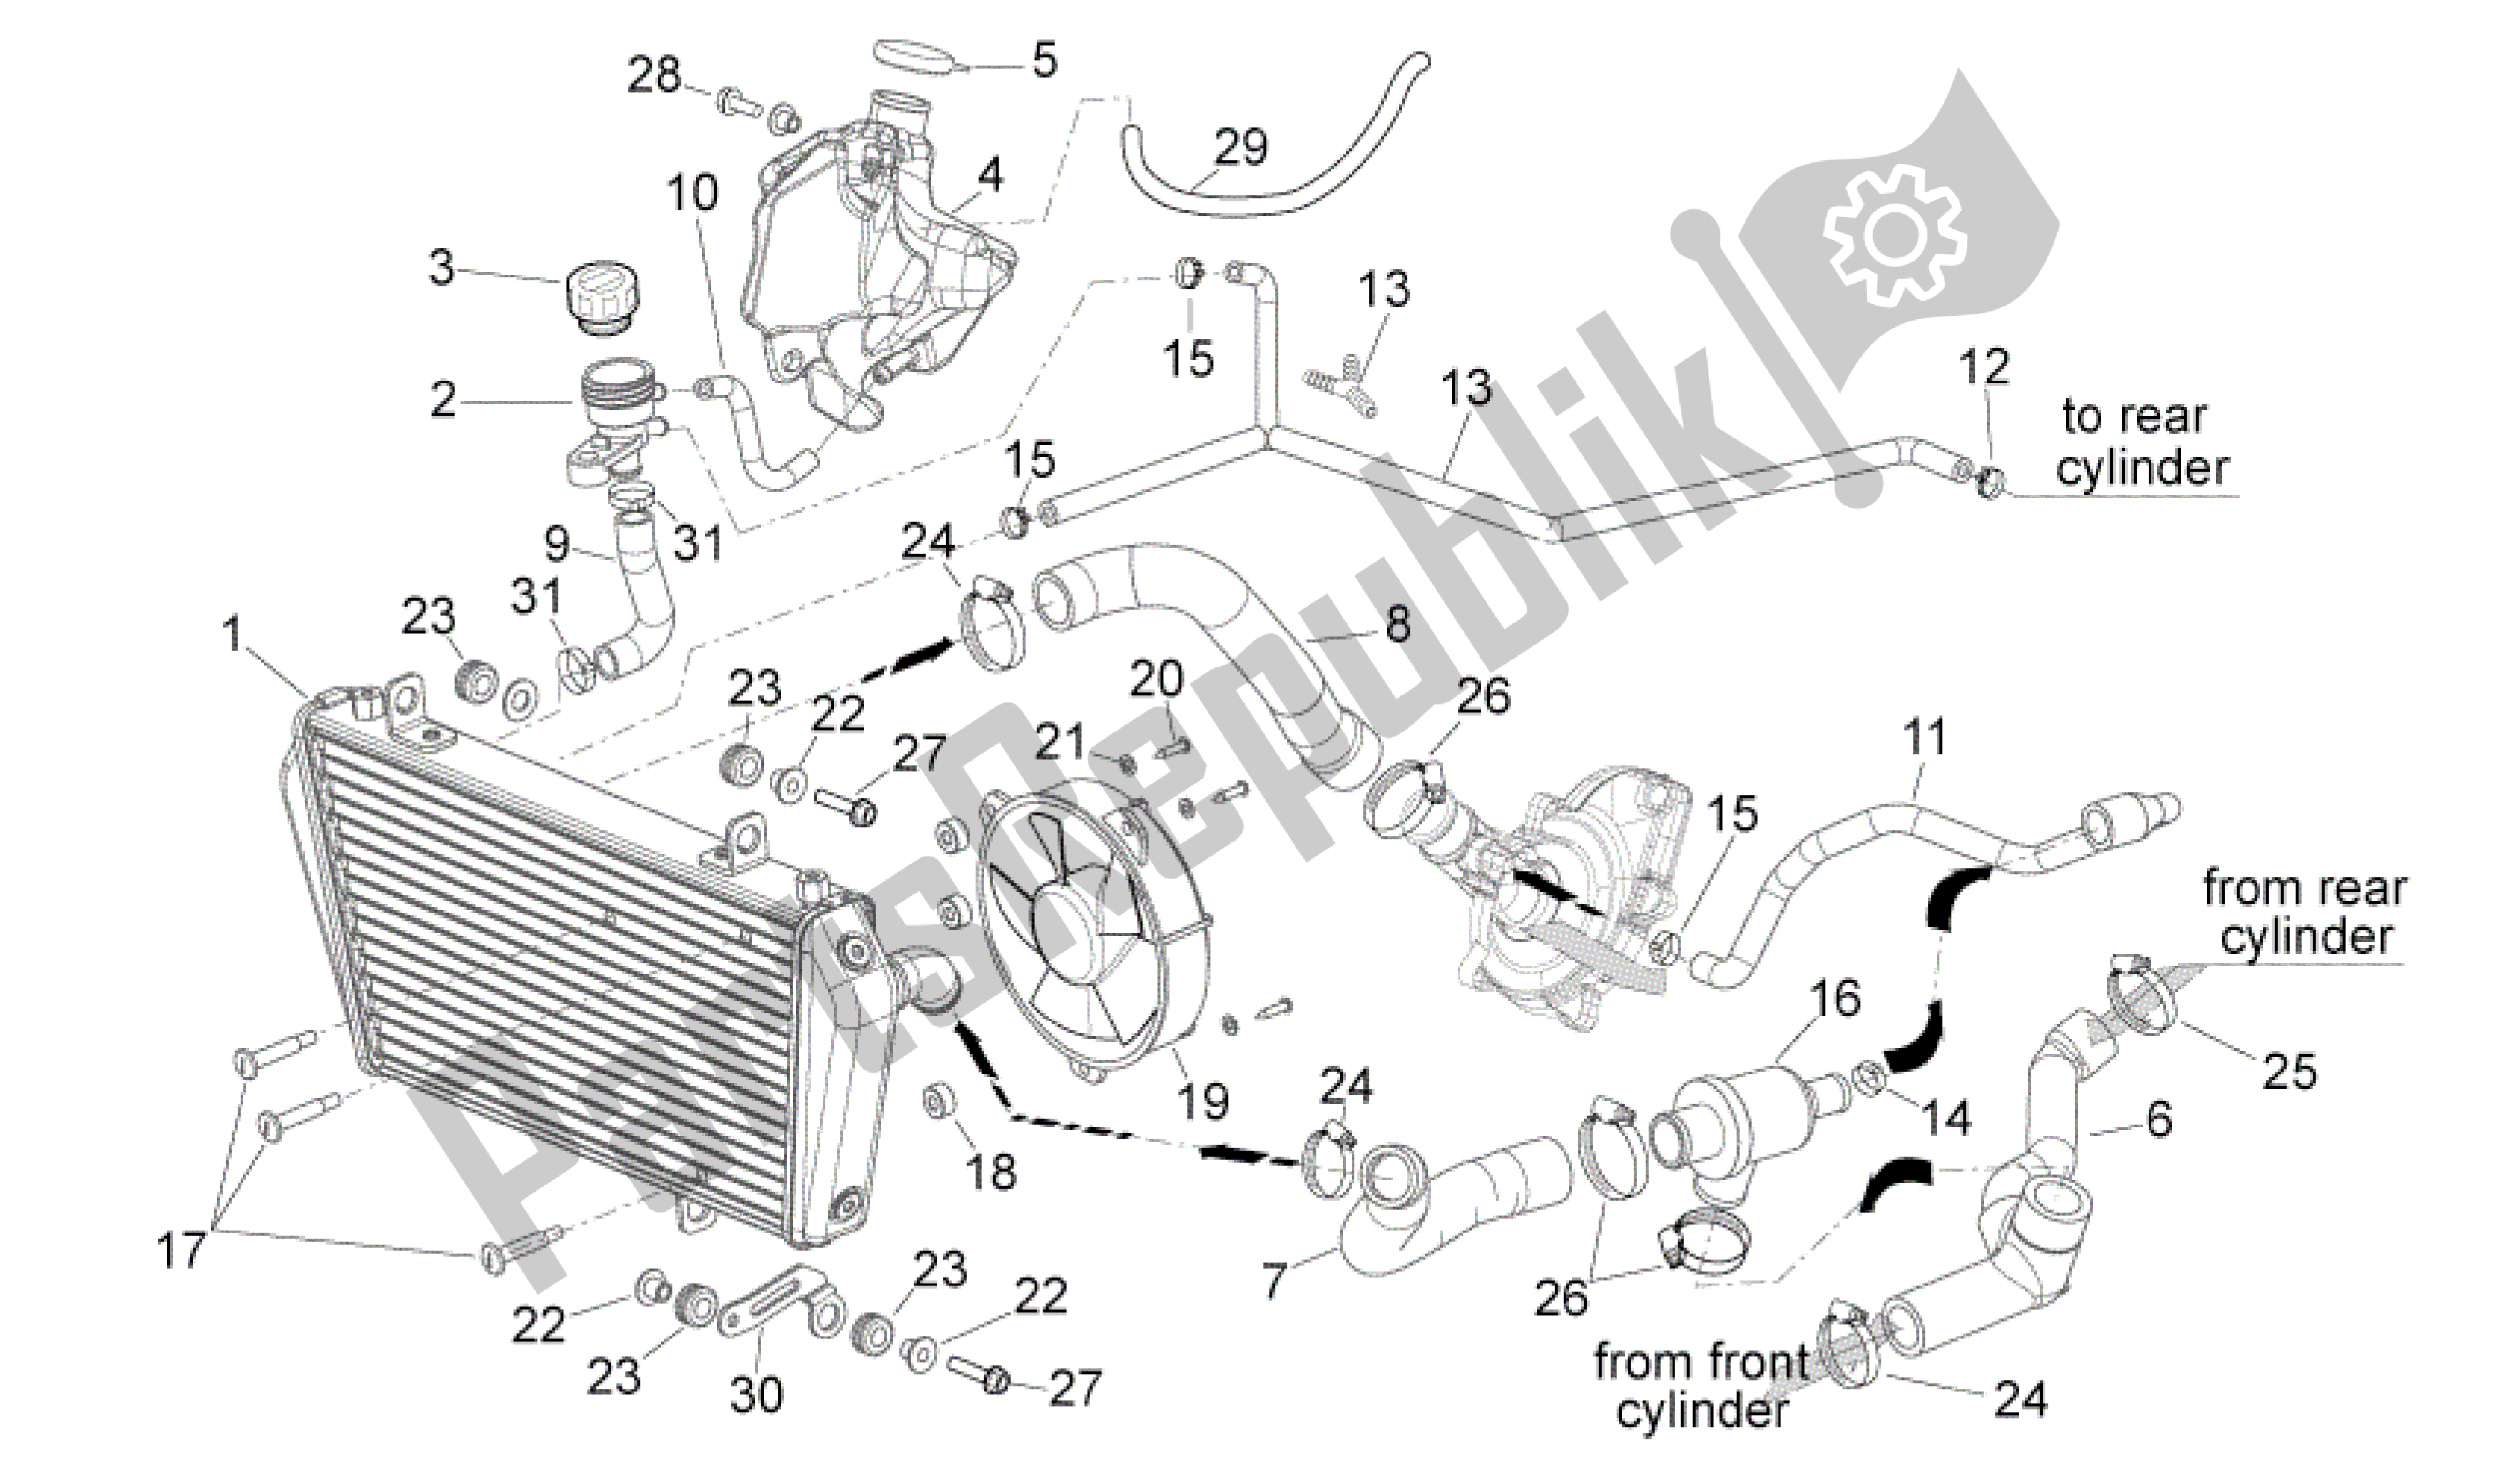 All parts for the Cooling System of the Aprilia Shiver 750 2007 - 2009